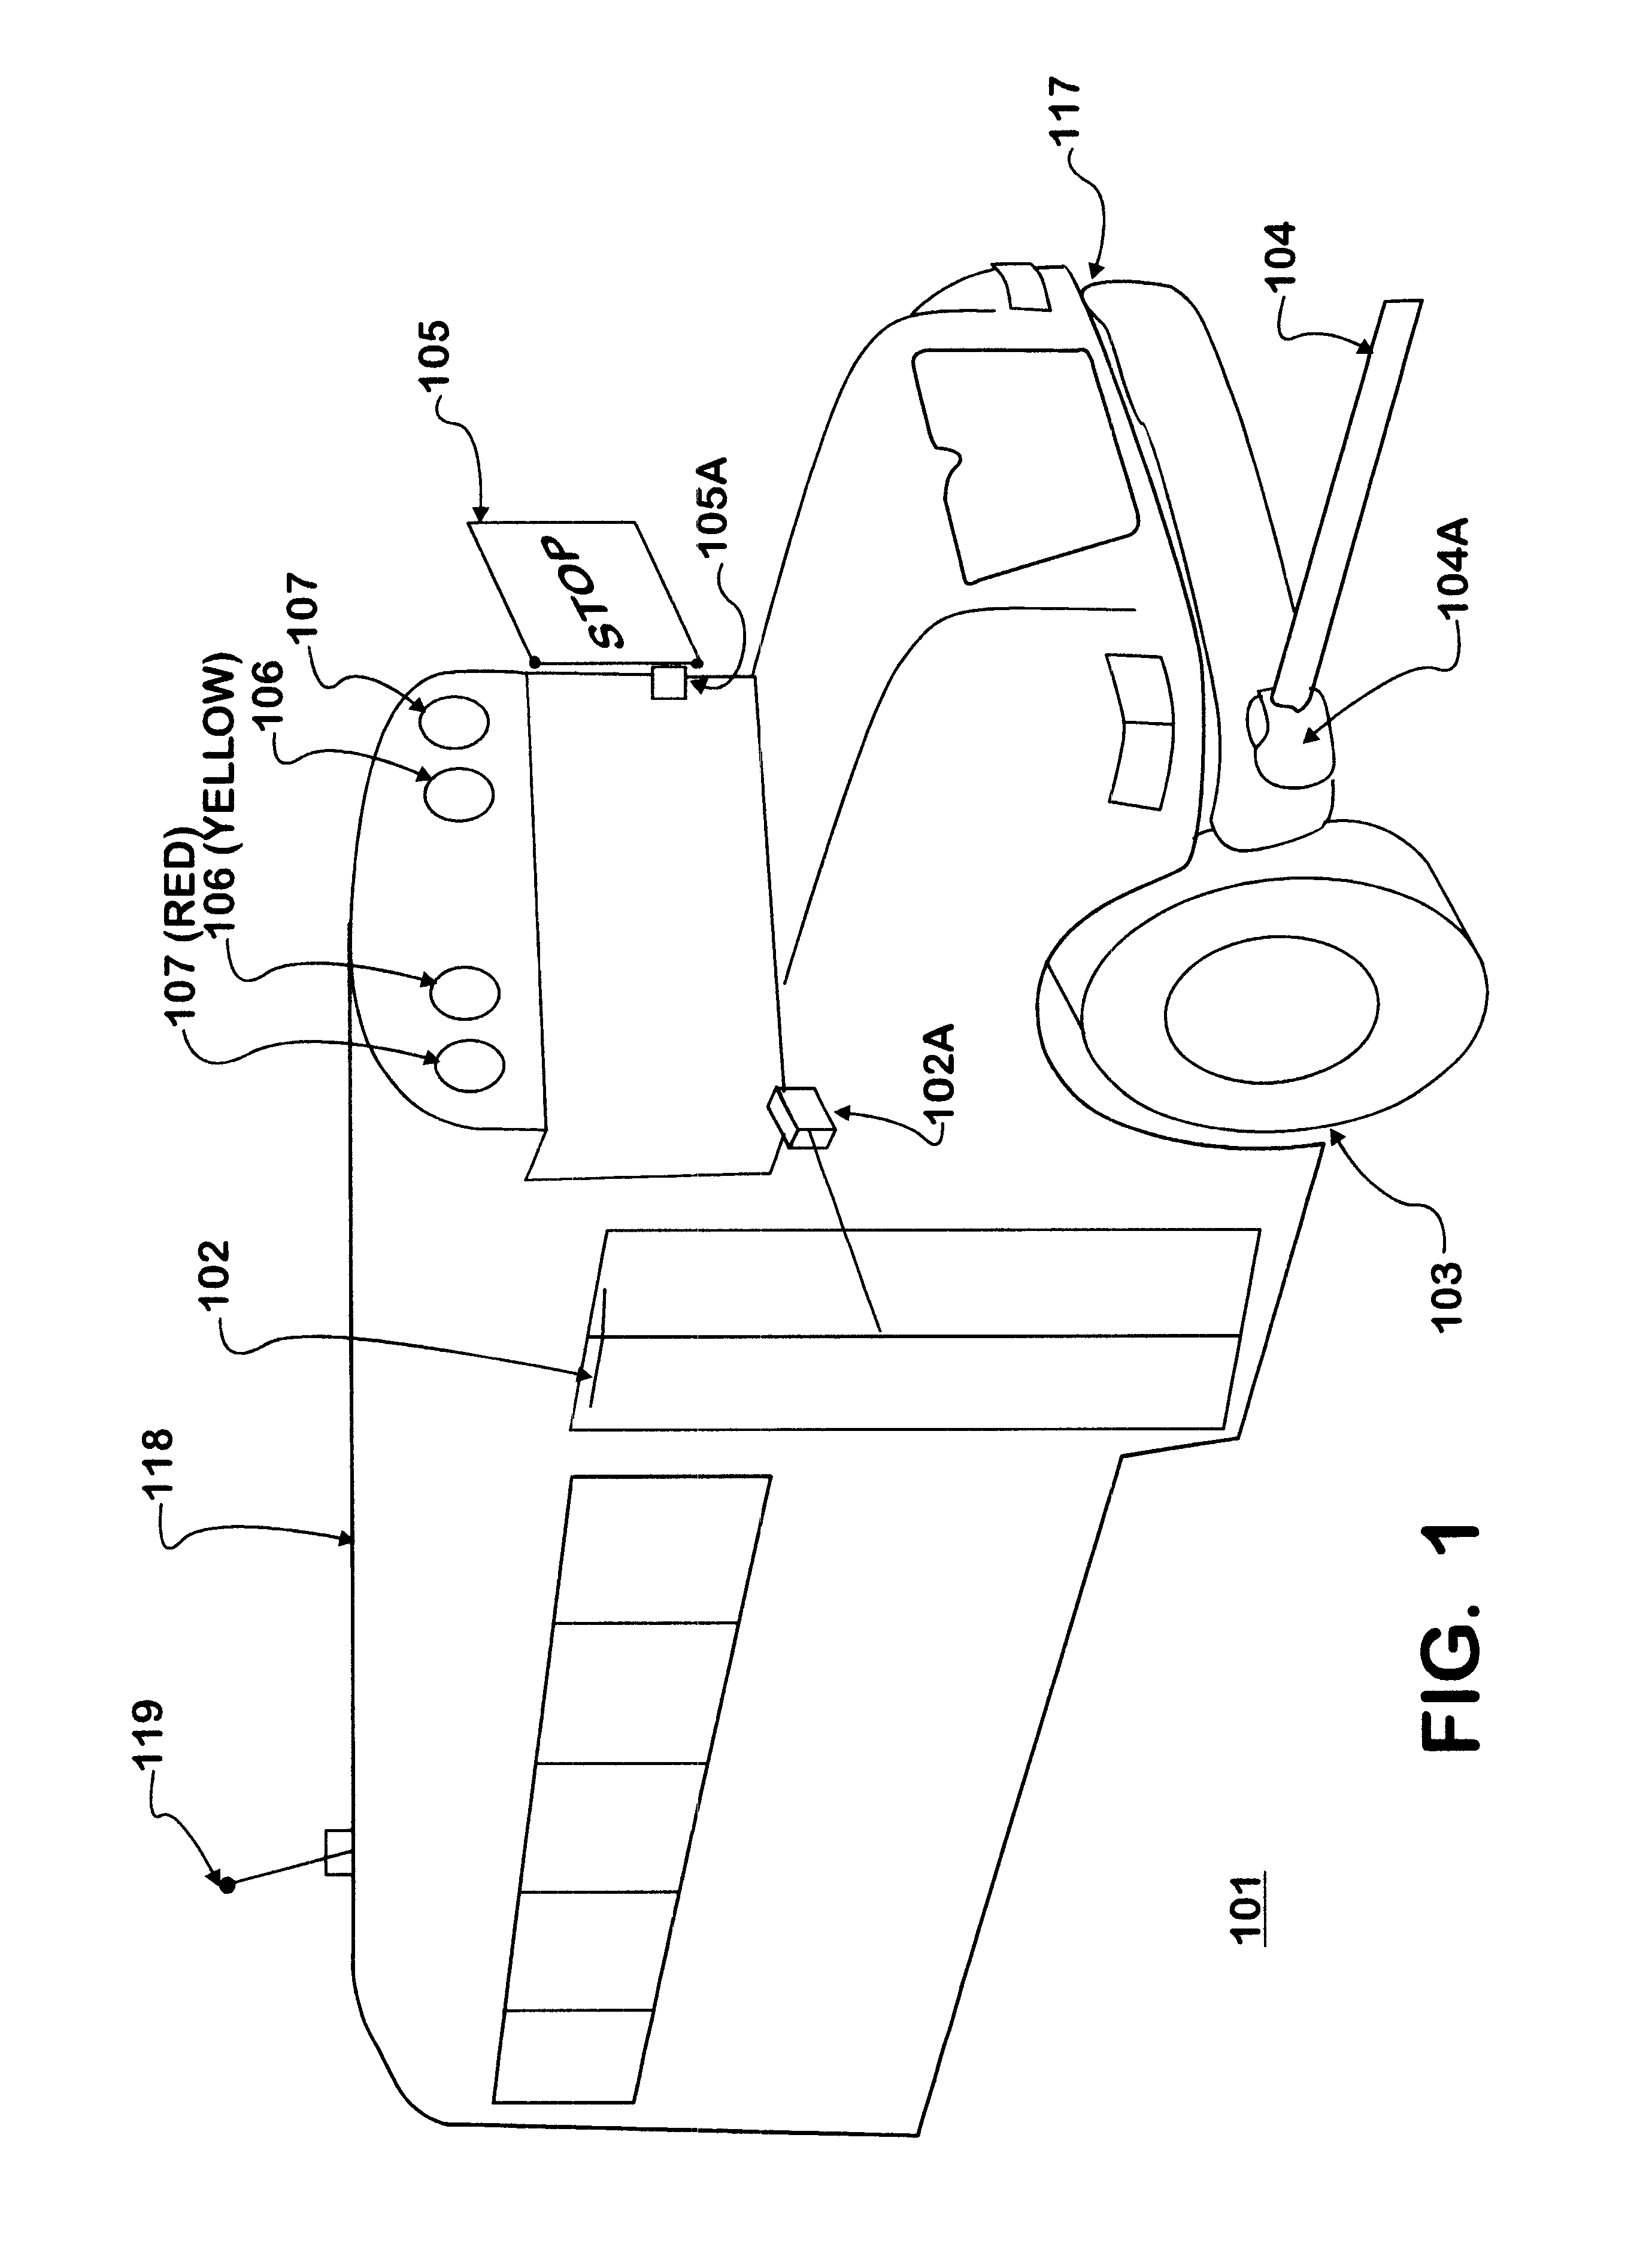 Programmable vehicle stopping system and process for route learning